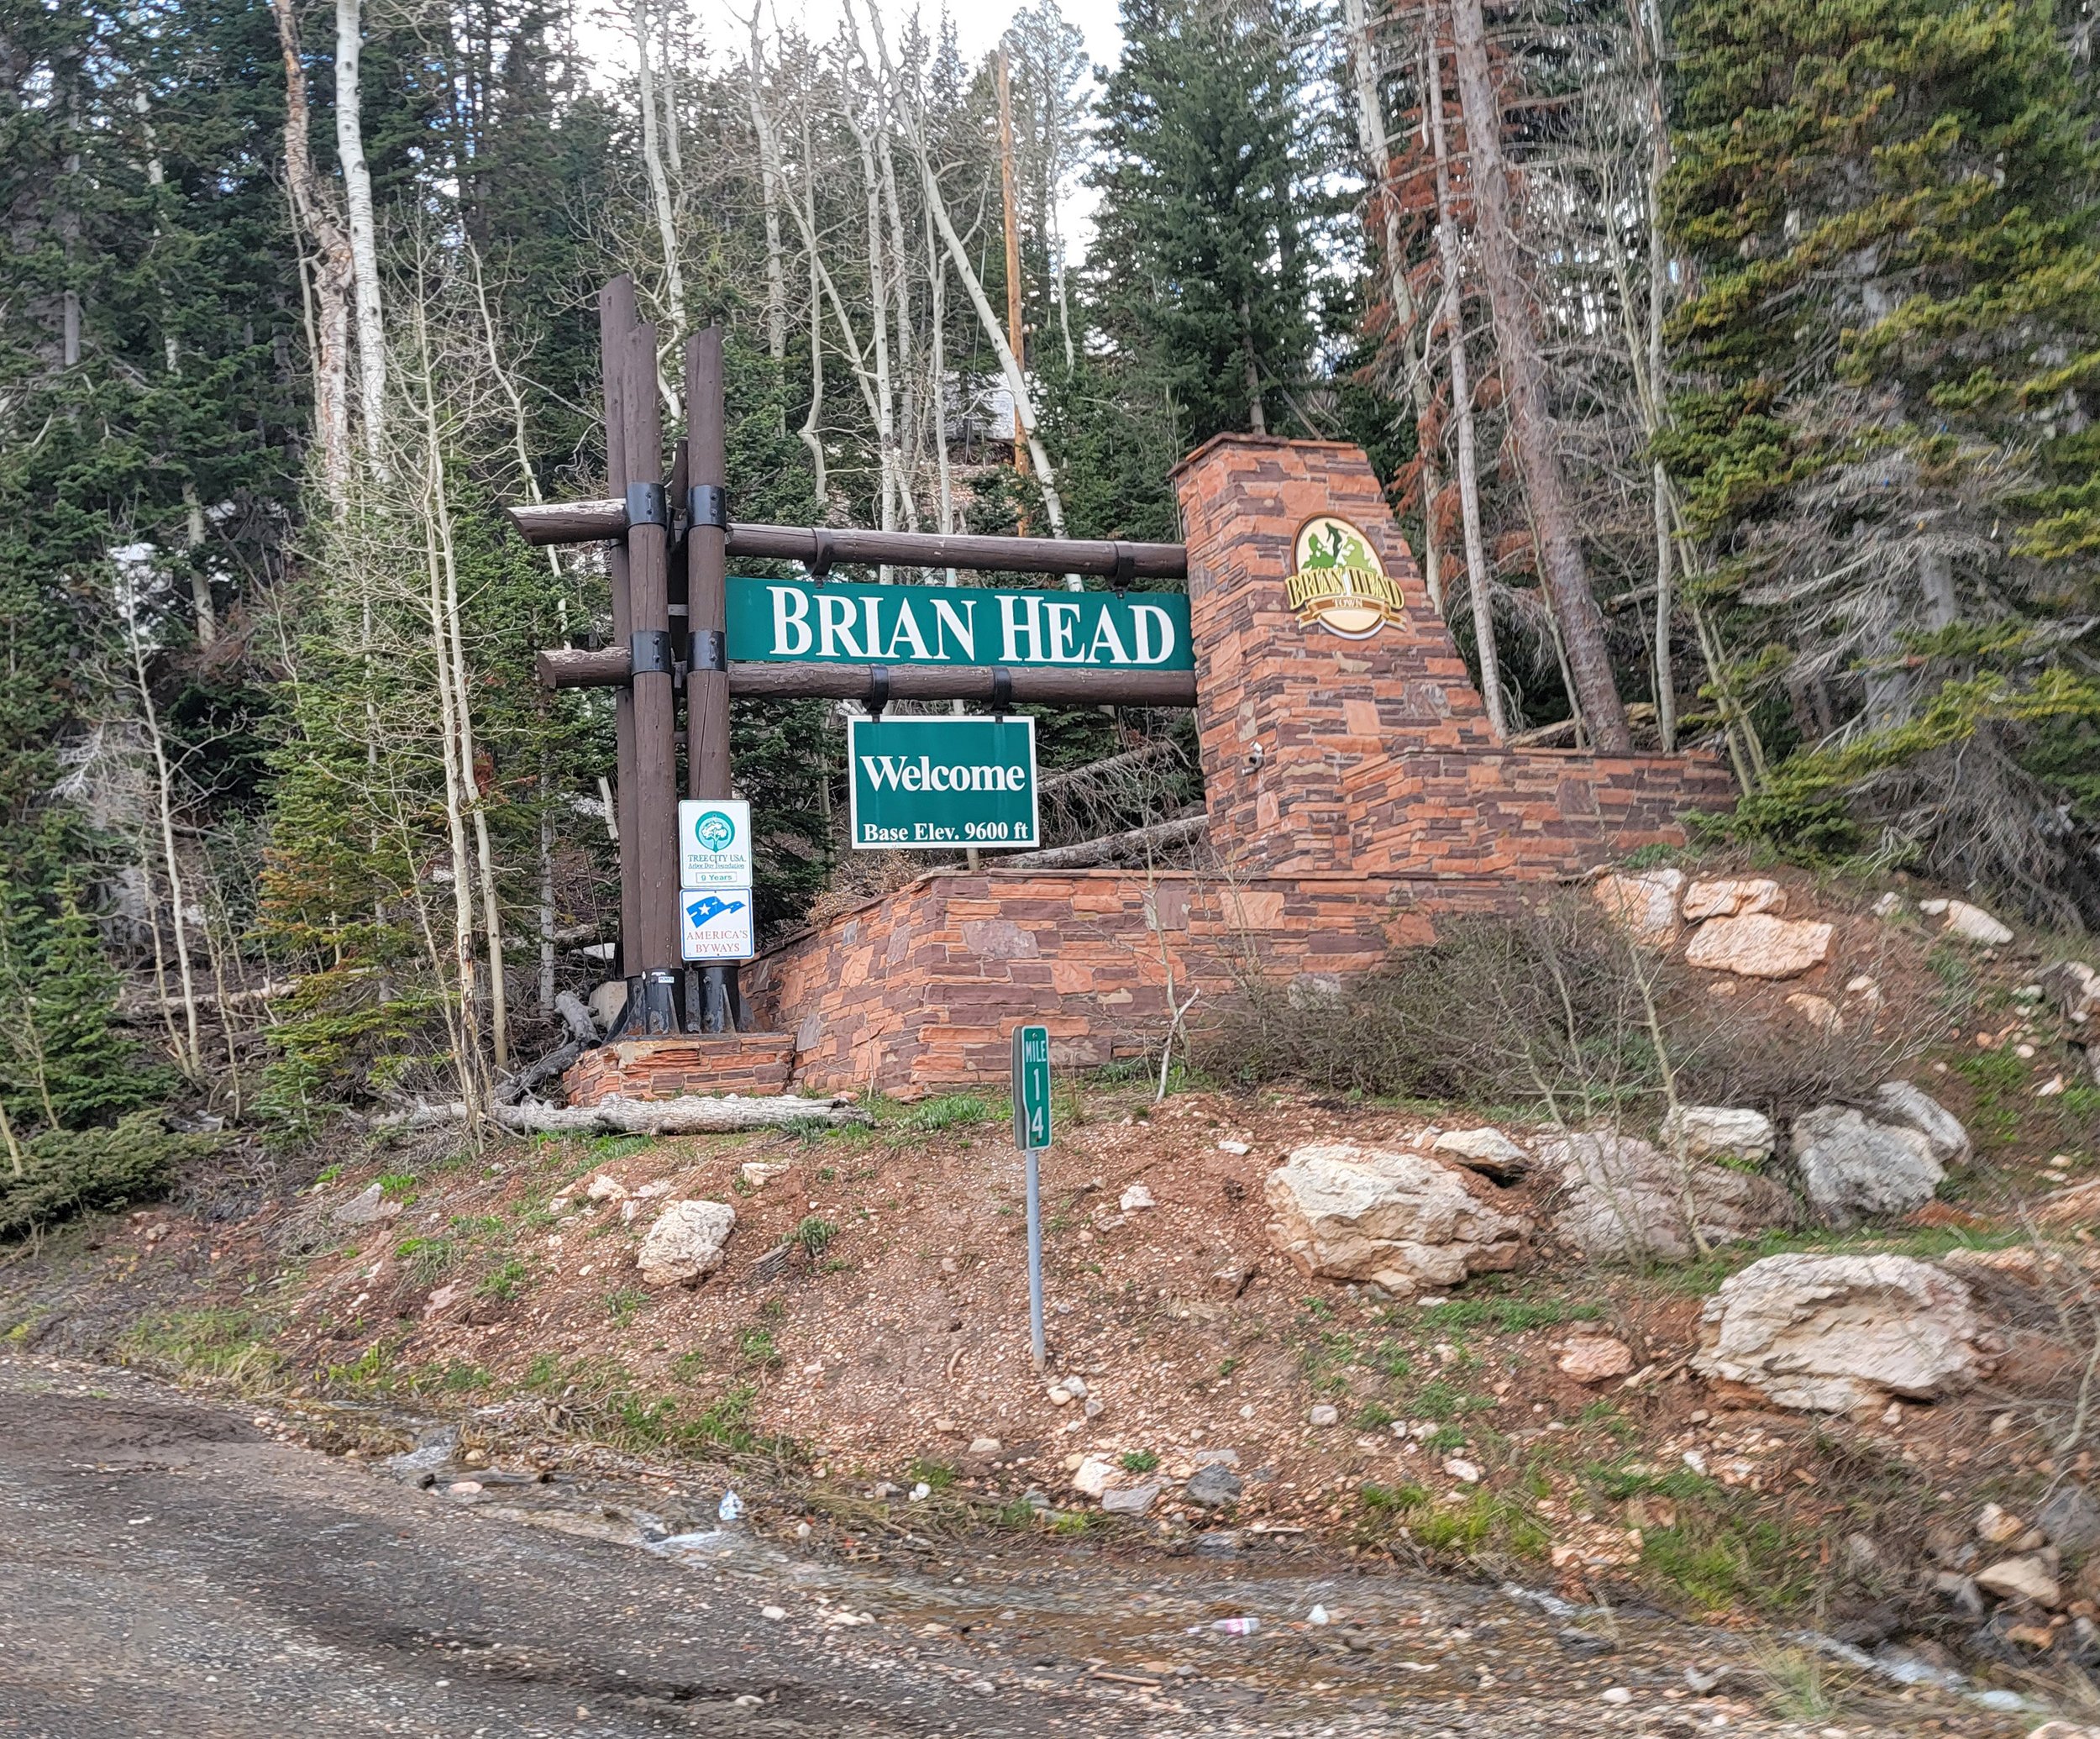 After you get over the super steep part you enter the town of Brian Head. No pictures because I wanted to GTFO as soon as possible. Can't believe people live here.